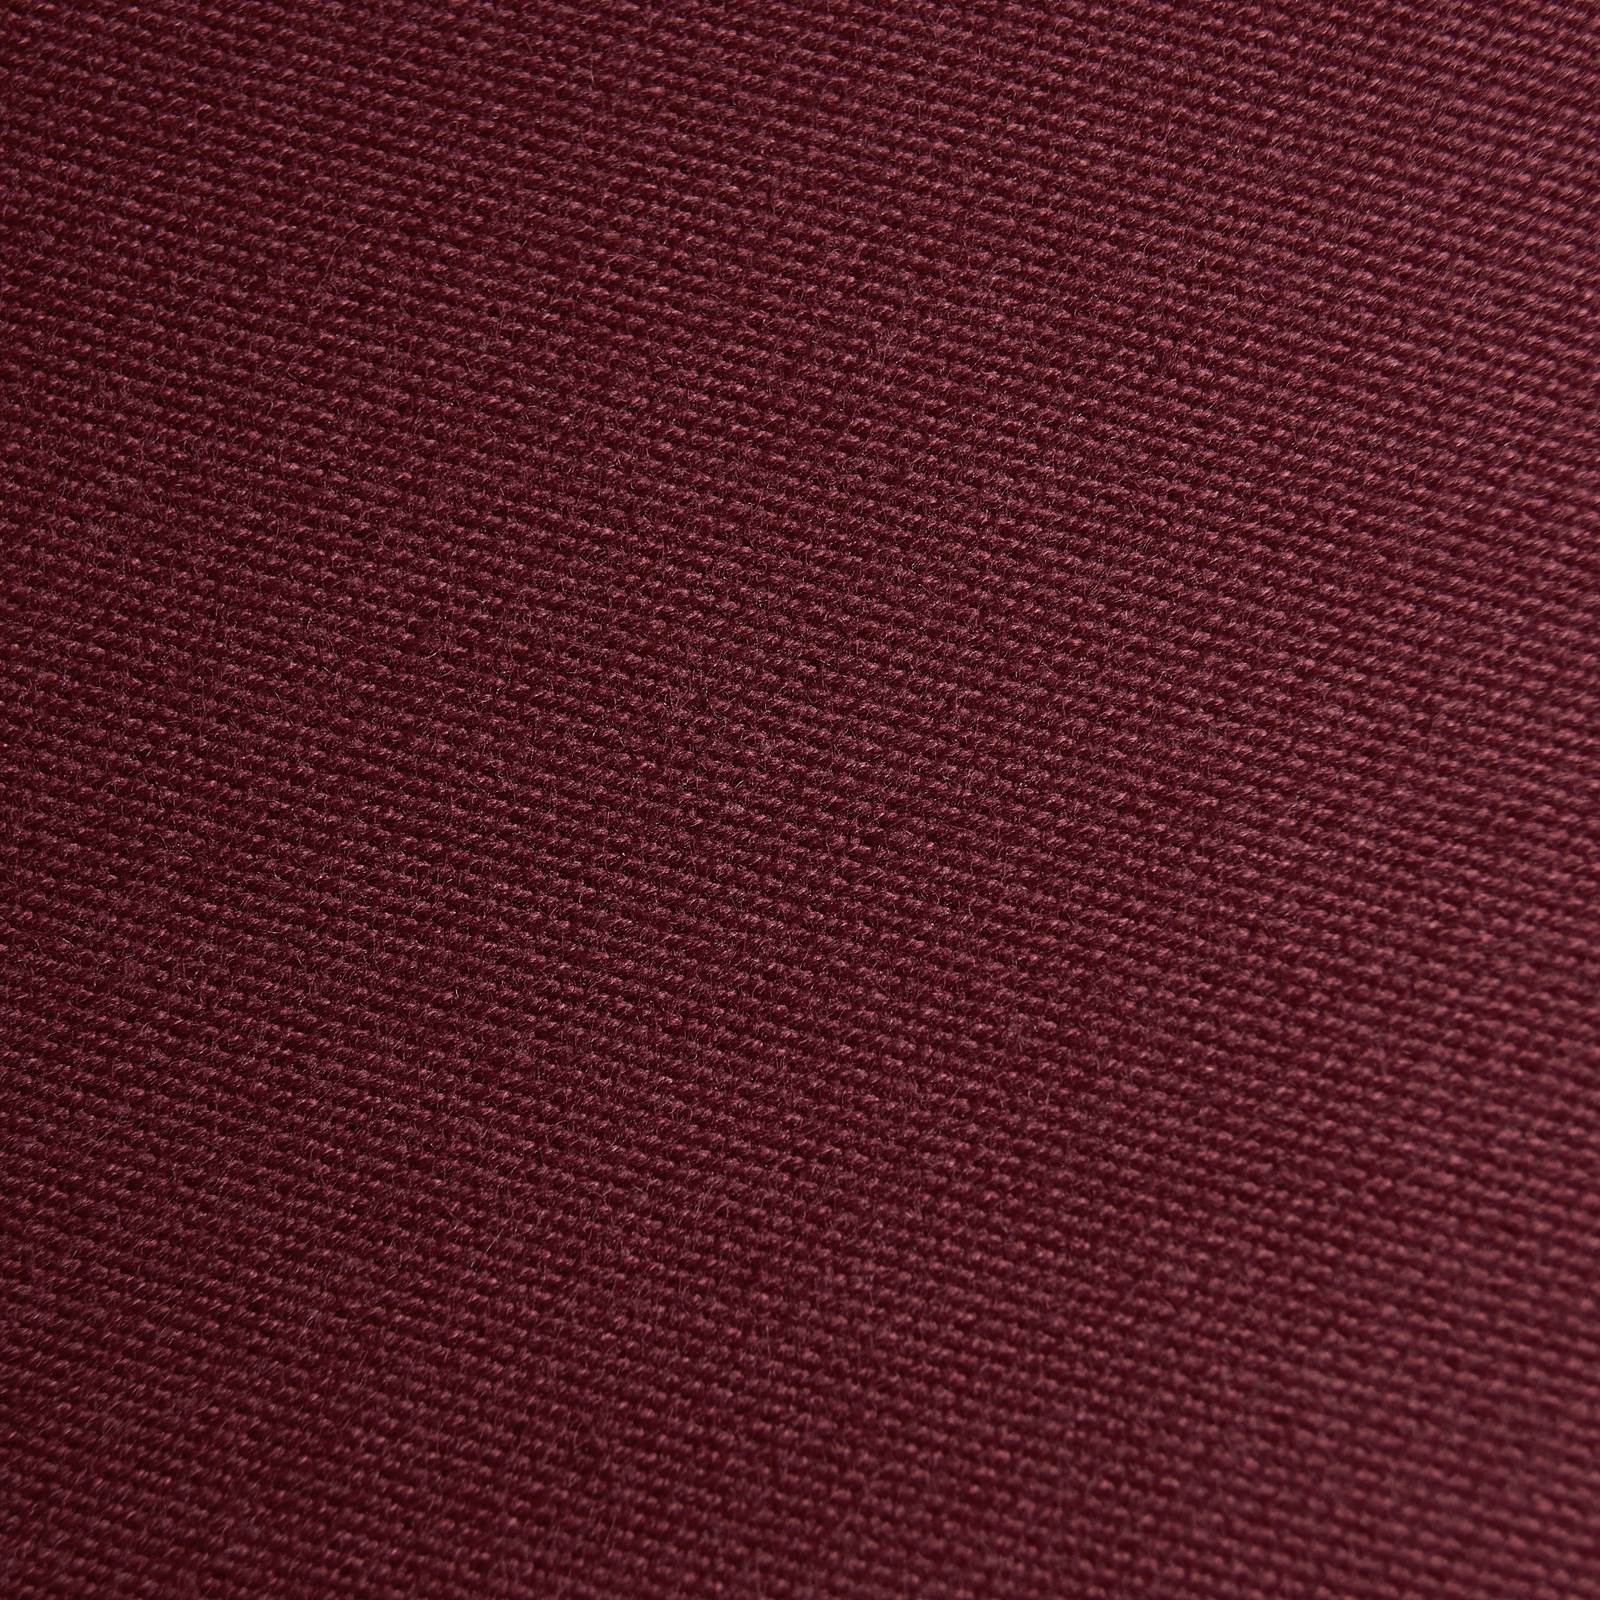 Vera - two-ply damask fabric - Indanthren® coloration (bordeaux)